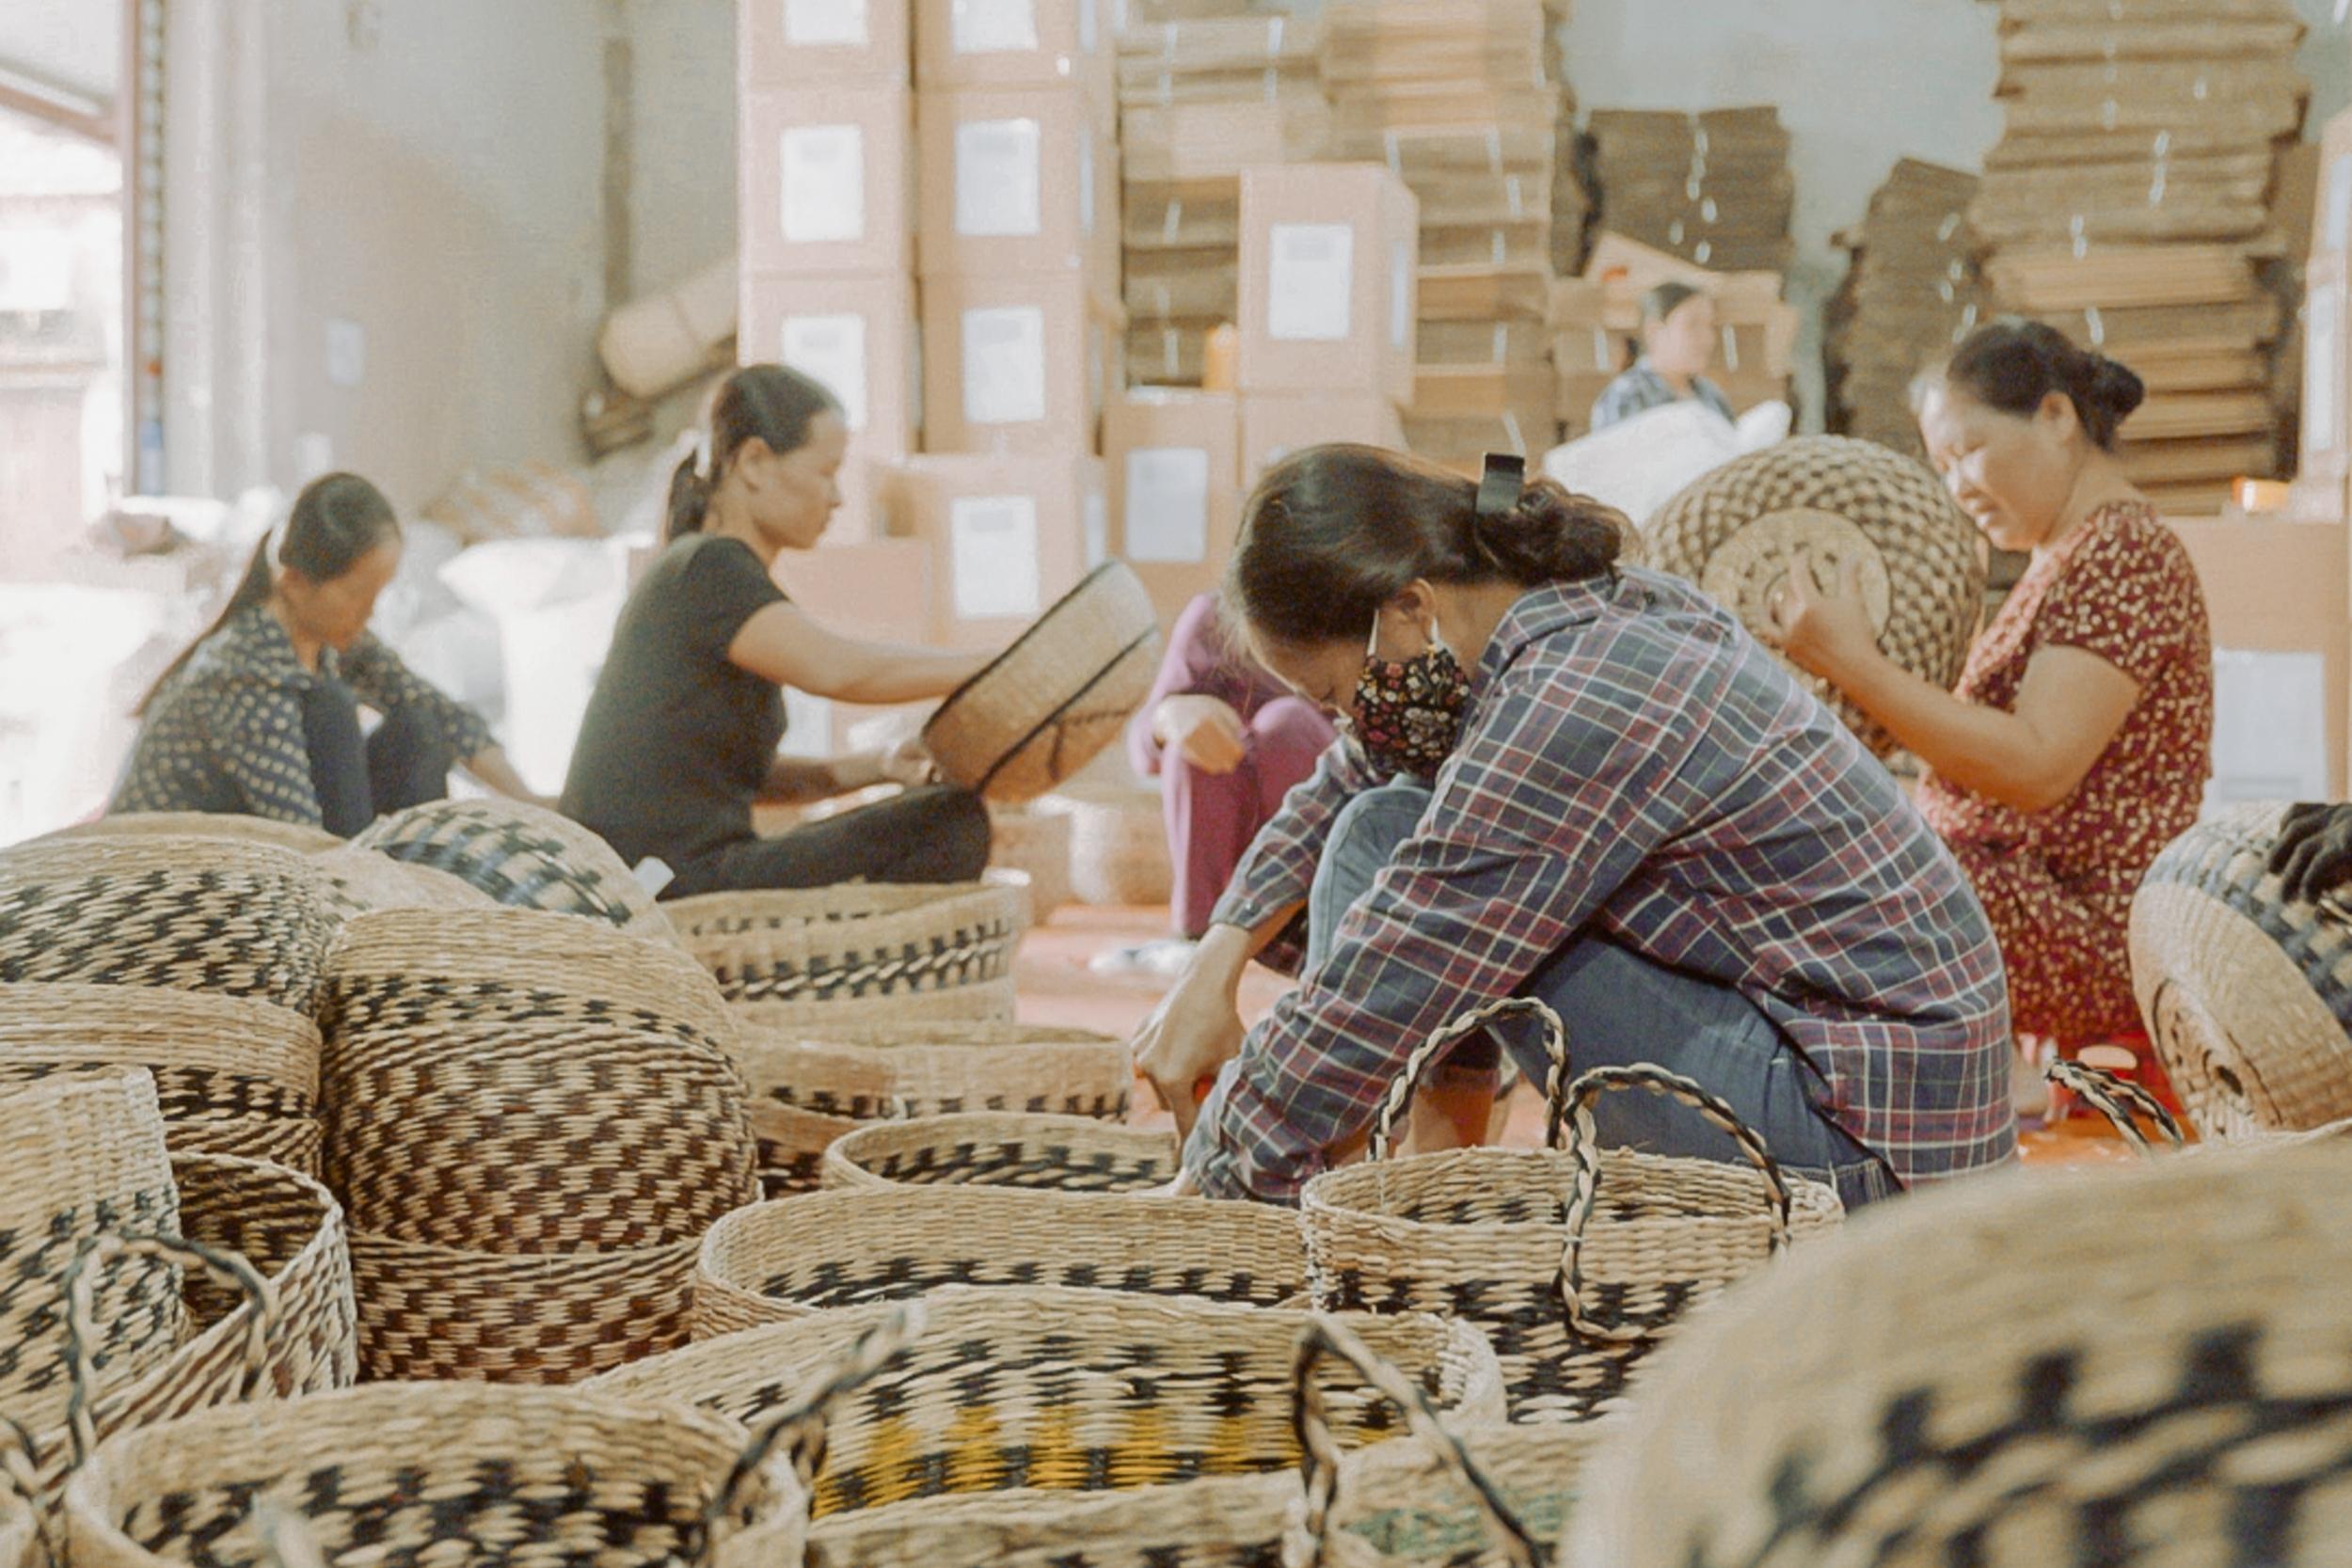 people are weaving baskets